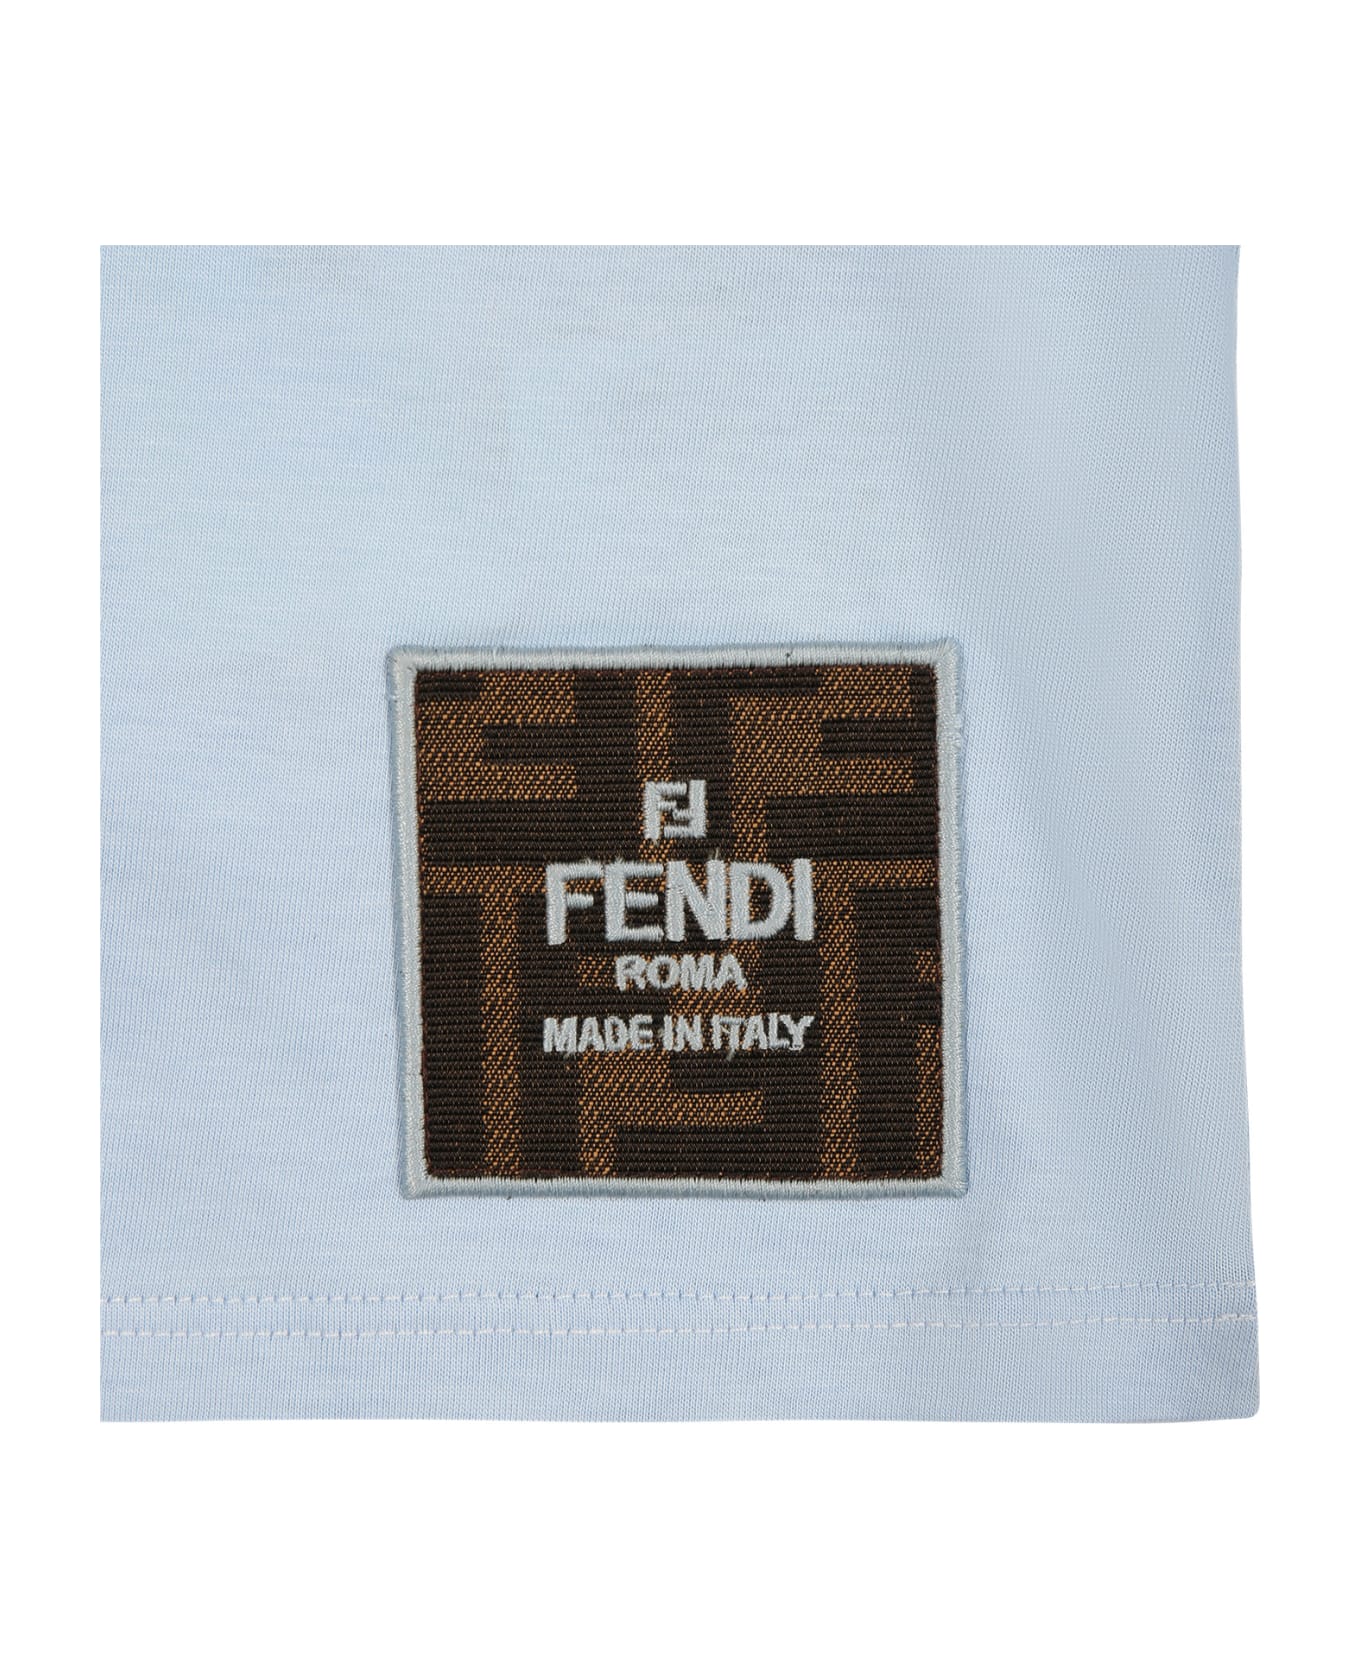 Fendi Light Blue T-shirt For Baby Boy With Ff - Light Blue Tシャツ＆ポロシャツ